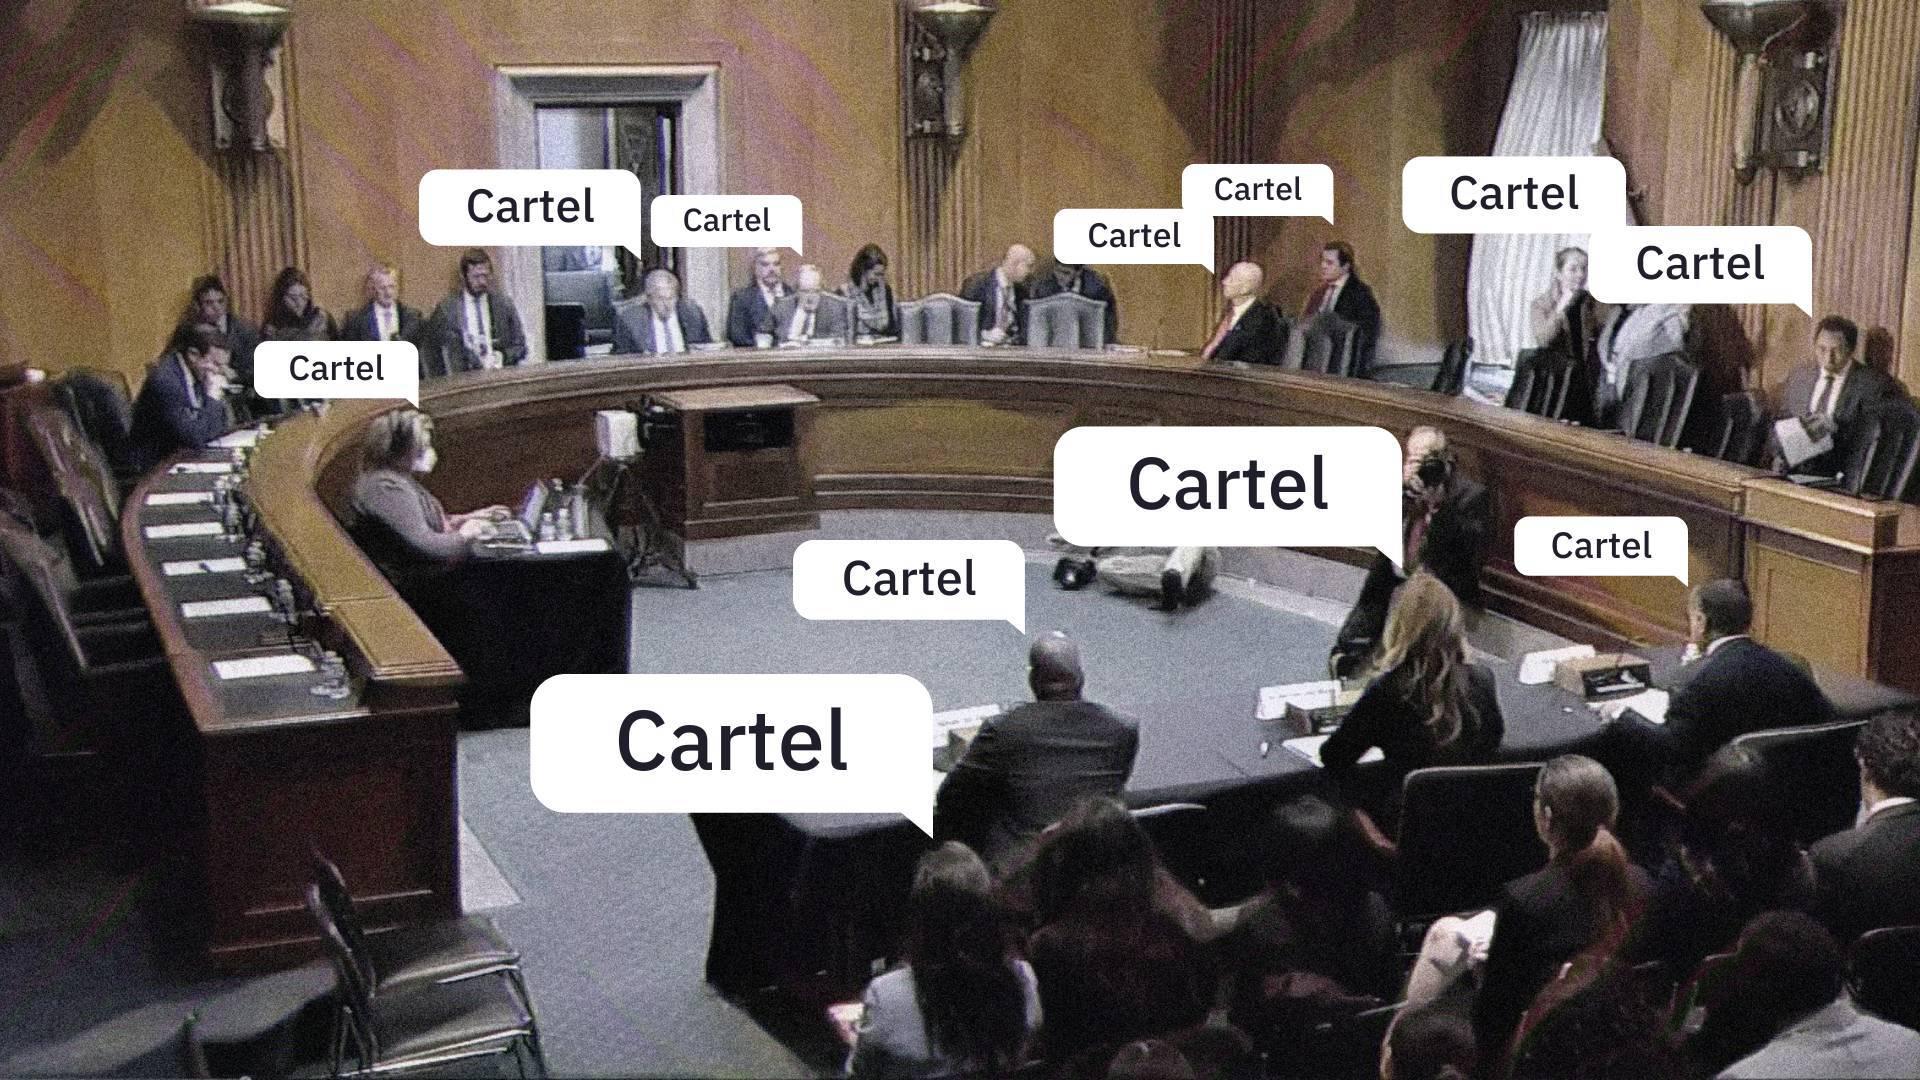 After US Hearing on Fentanyl, Is It Time to Retire the Word ‘Cartel’?